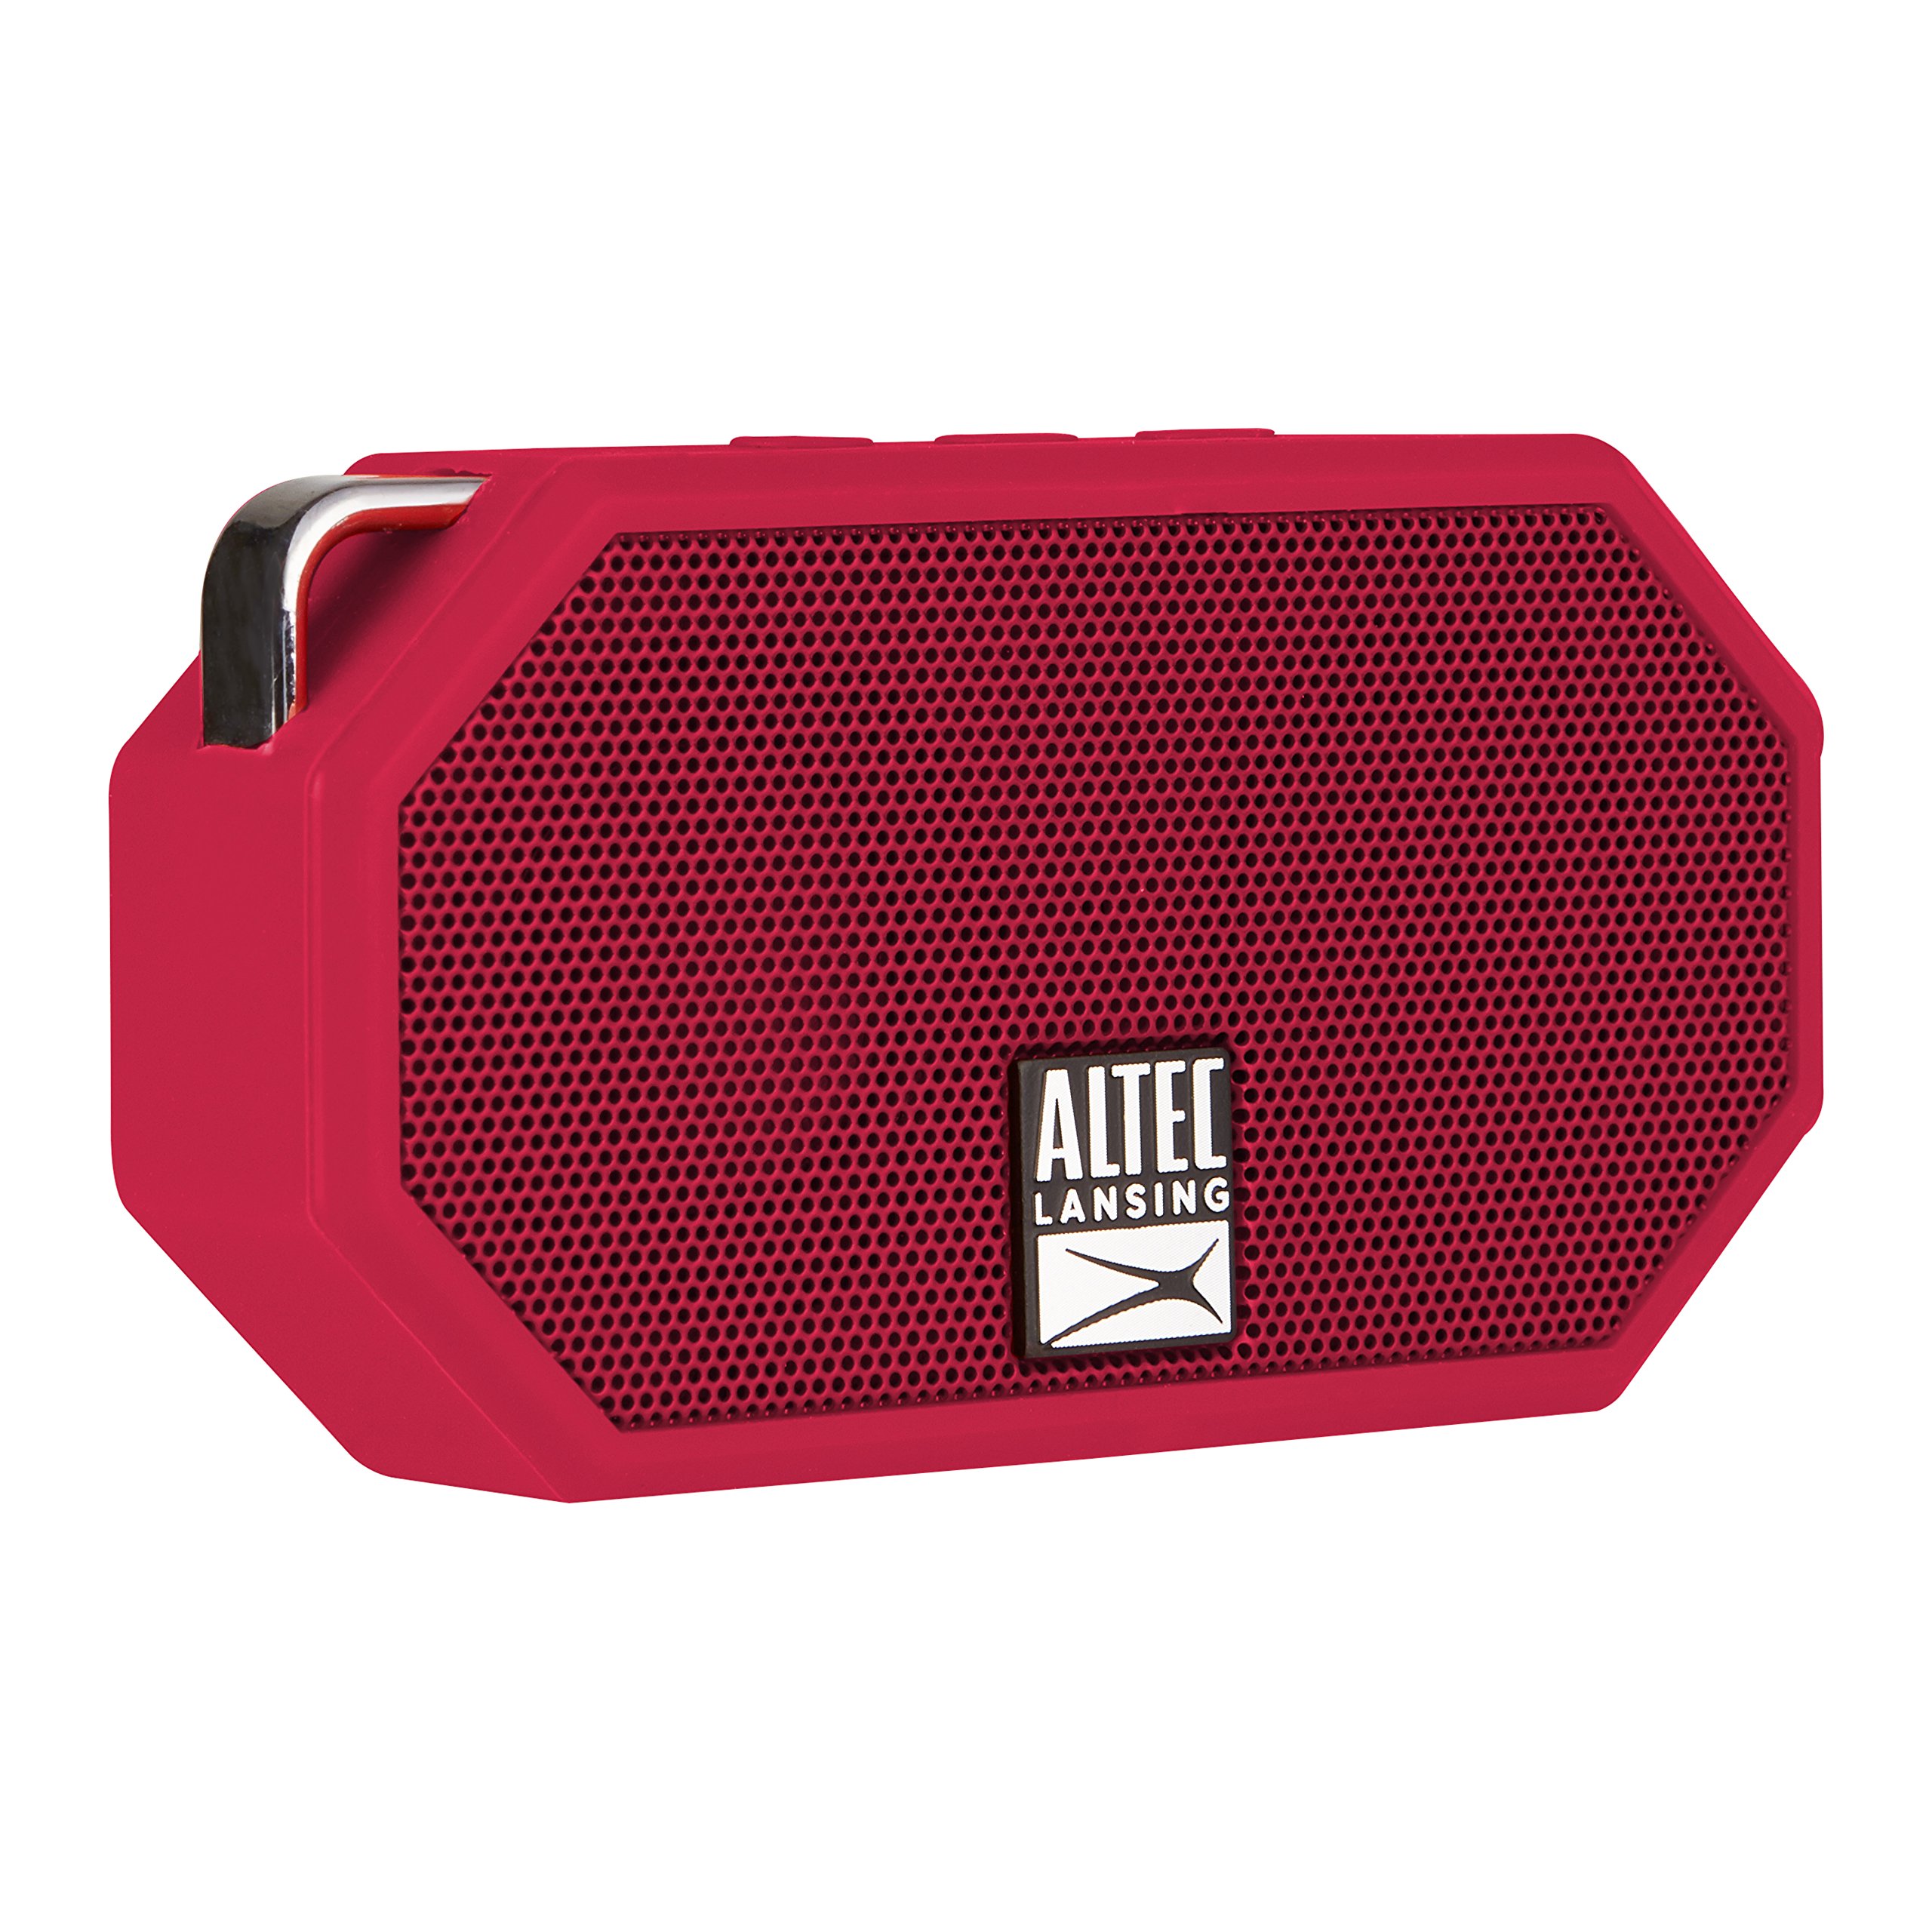 Altec Lansing Mini H2O - Waterproof Bluetooth Speaker, IP67 Certified & Floats in Water, Compact & Portable Speaker for Hiking, Camping, Pool, and Beach, Red